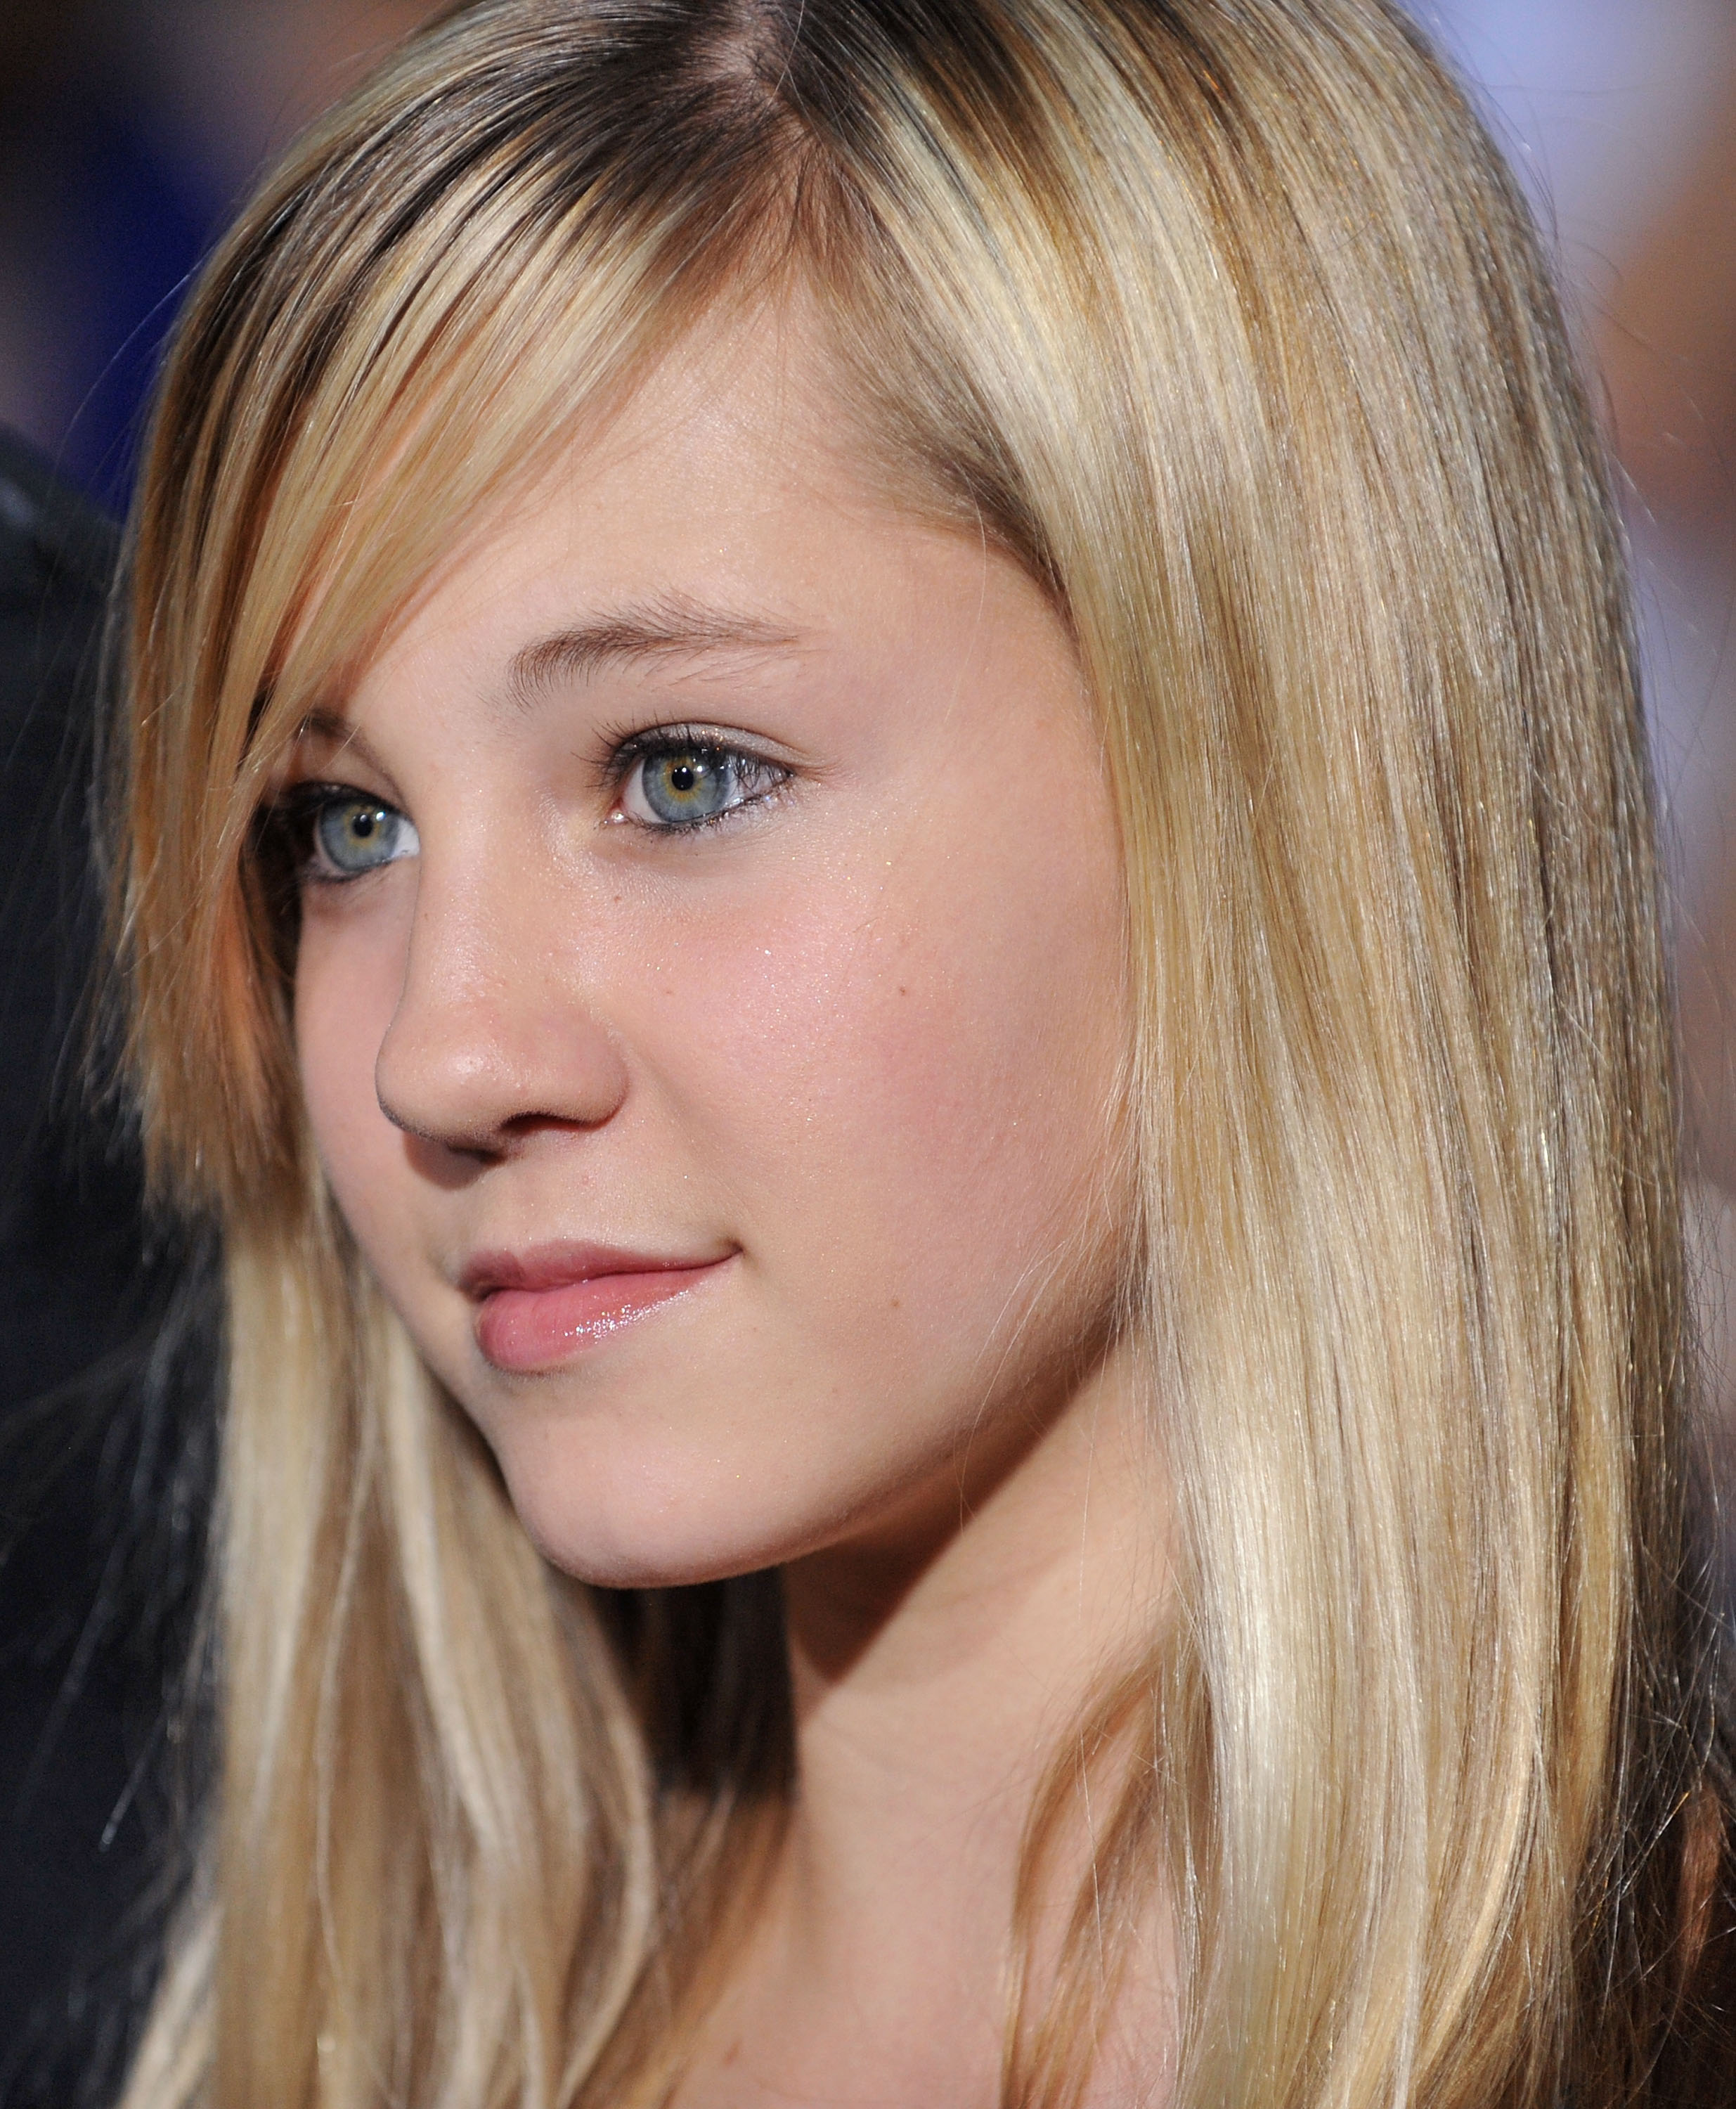 Ava Elizabeth Sambora, daughter of Heather Locklear, at the Los Angeles Premiere of "The Twilight Saga: New Moon" at Mann Bruin Theatre on November 16, 2009 in Westwood, California | Source: Getty Images